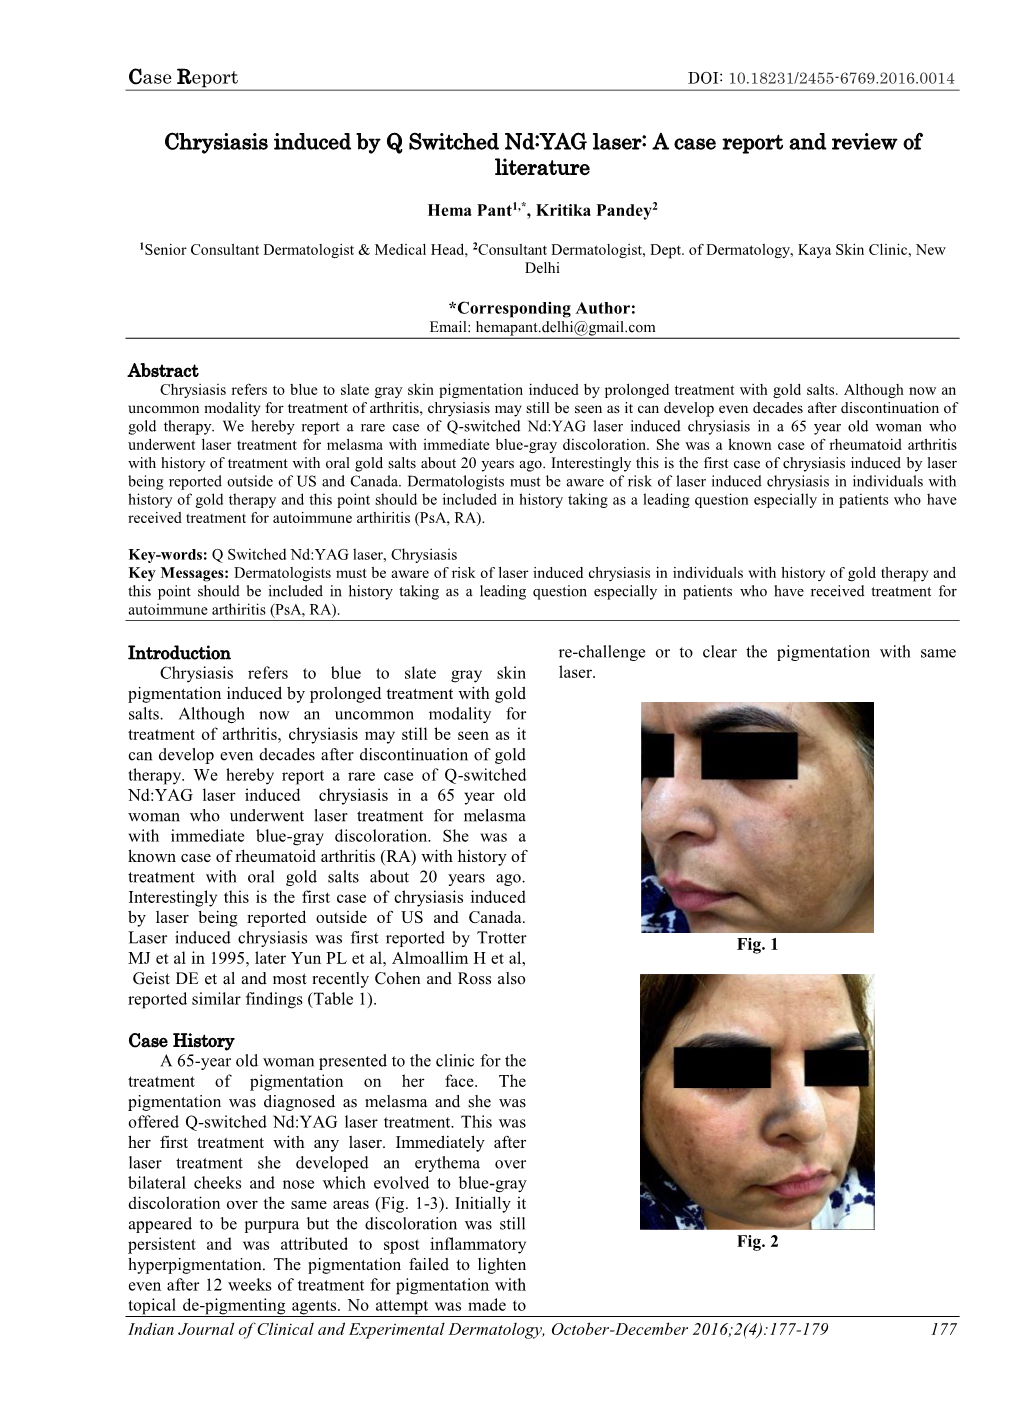 Chrysiasis Induced by Q Switched Nd:YAG Laser: a Case Report and Review of Literature